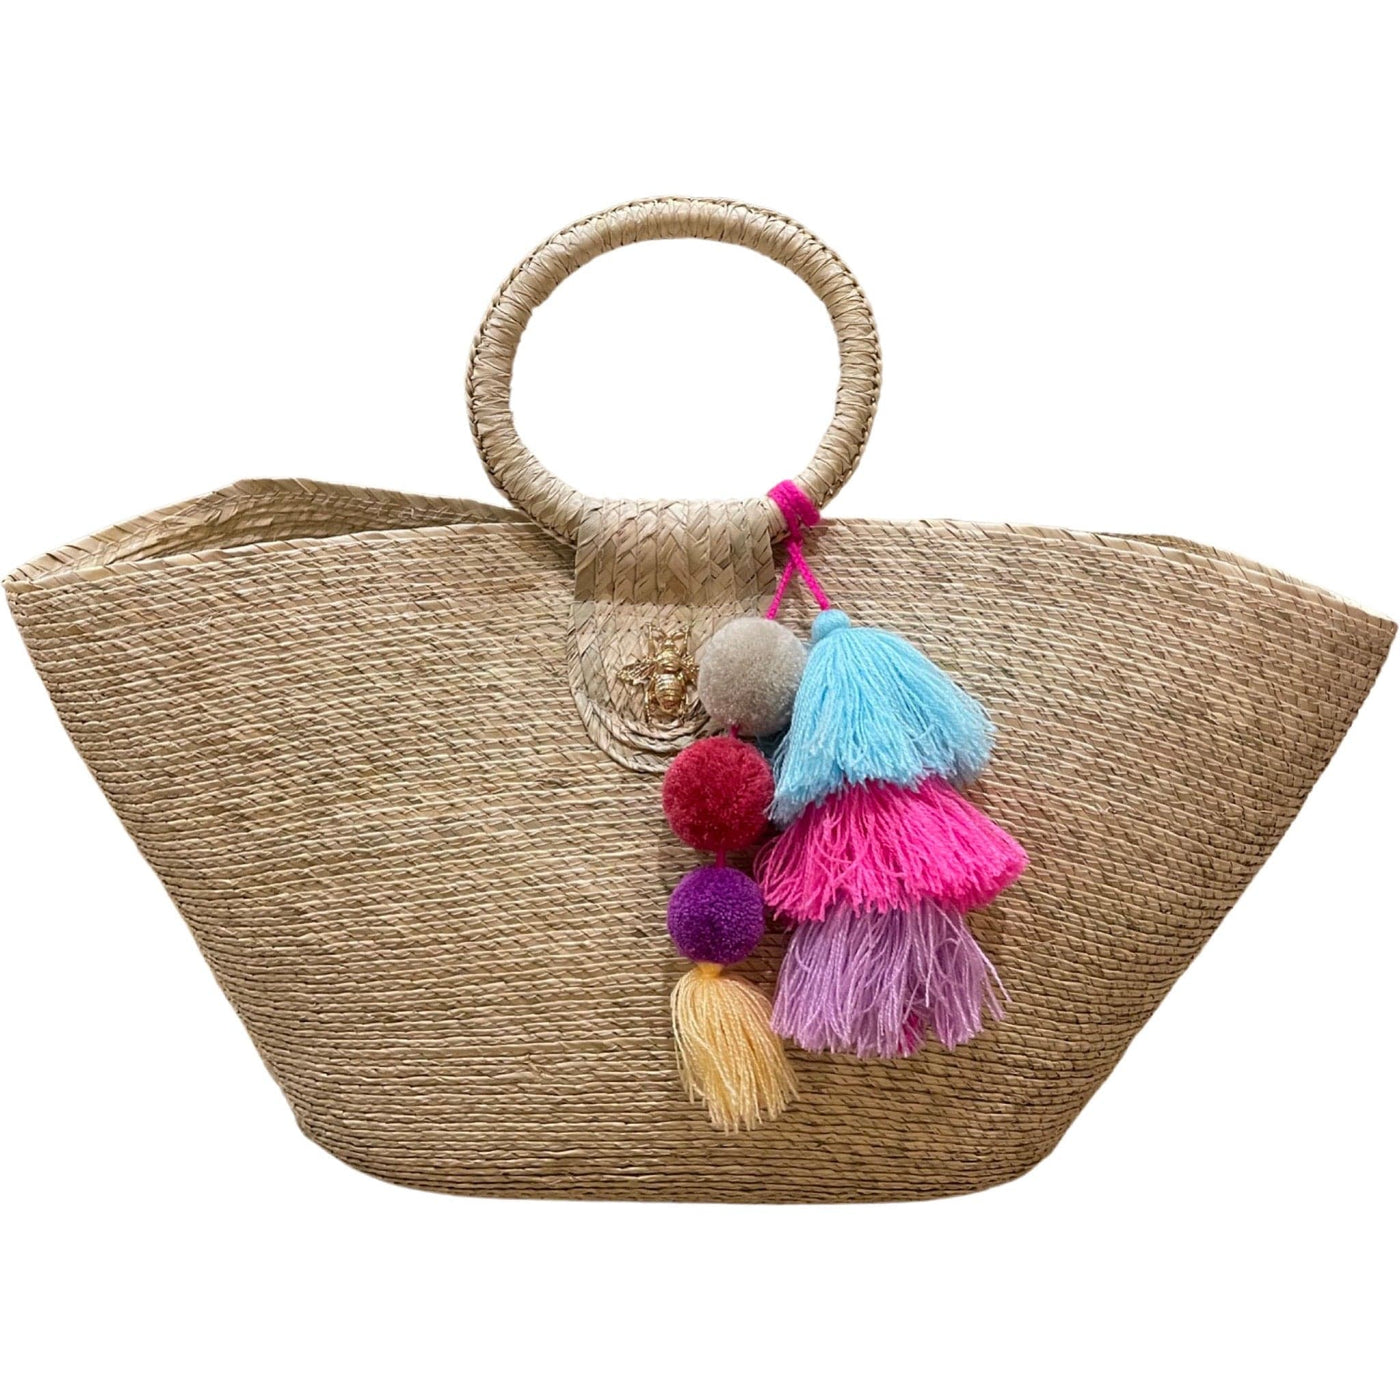 BeeLoved Custom Artisan Bags and Gifts Handbags Natural Natural Valerie Palm Tote